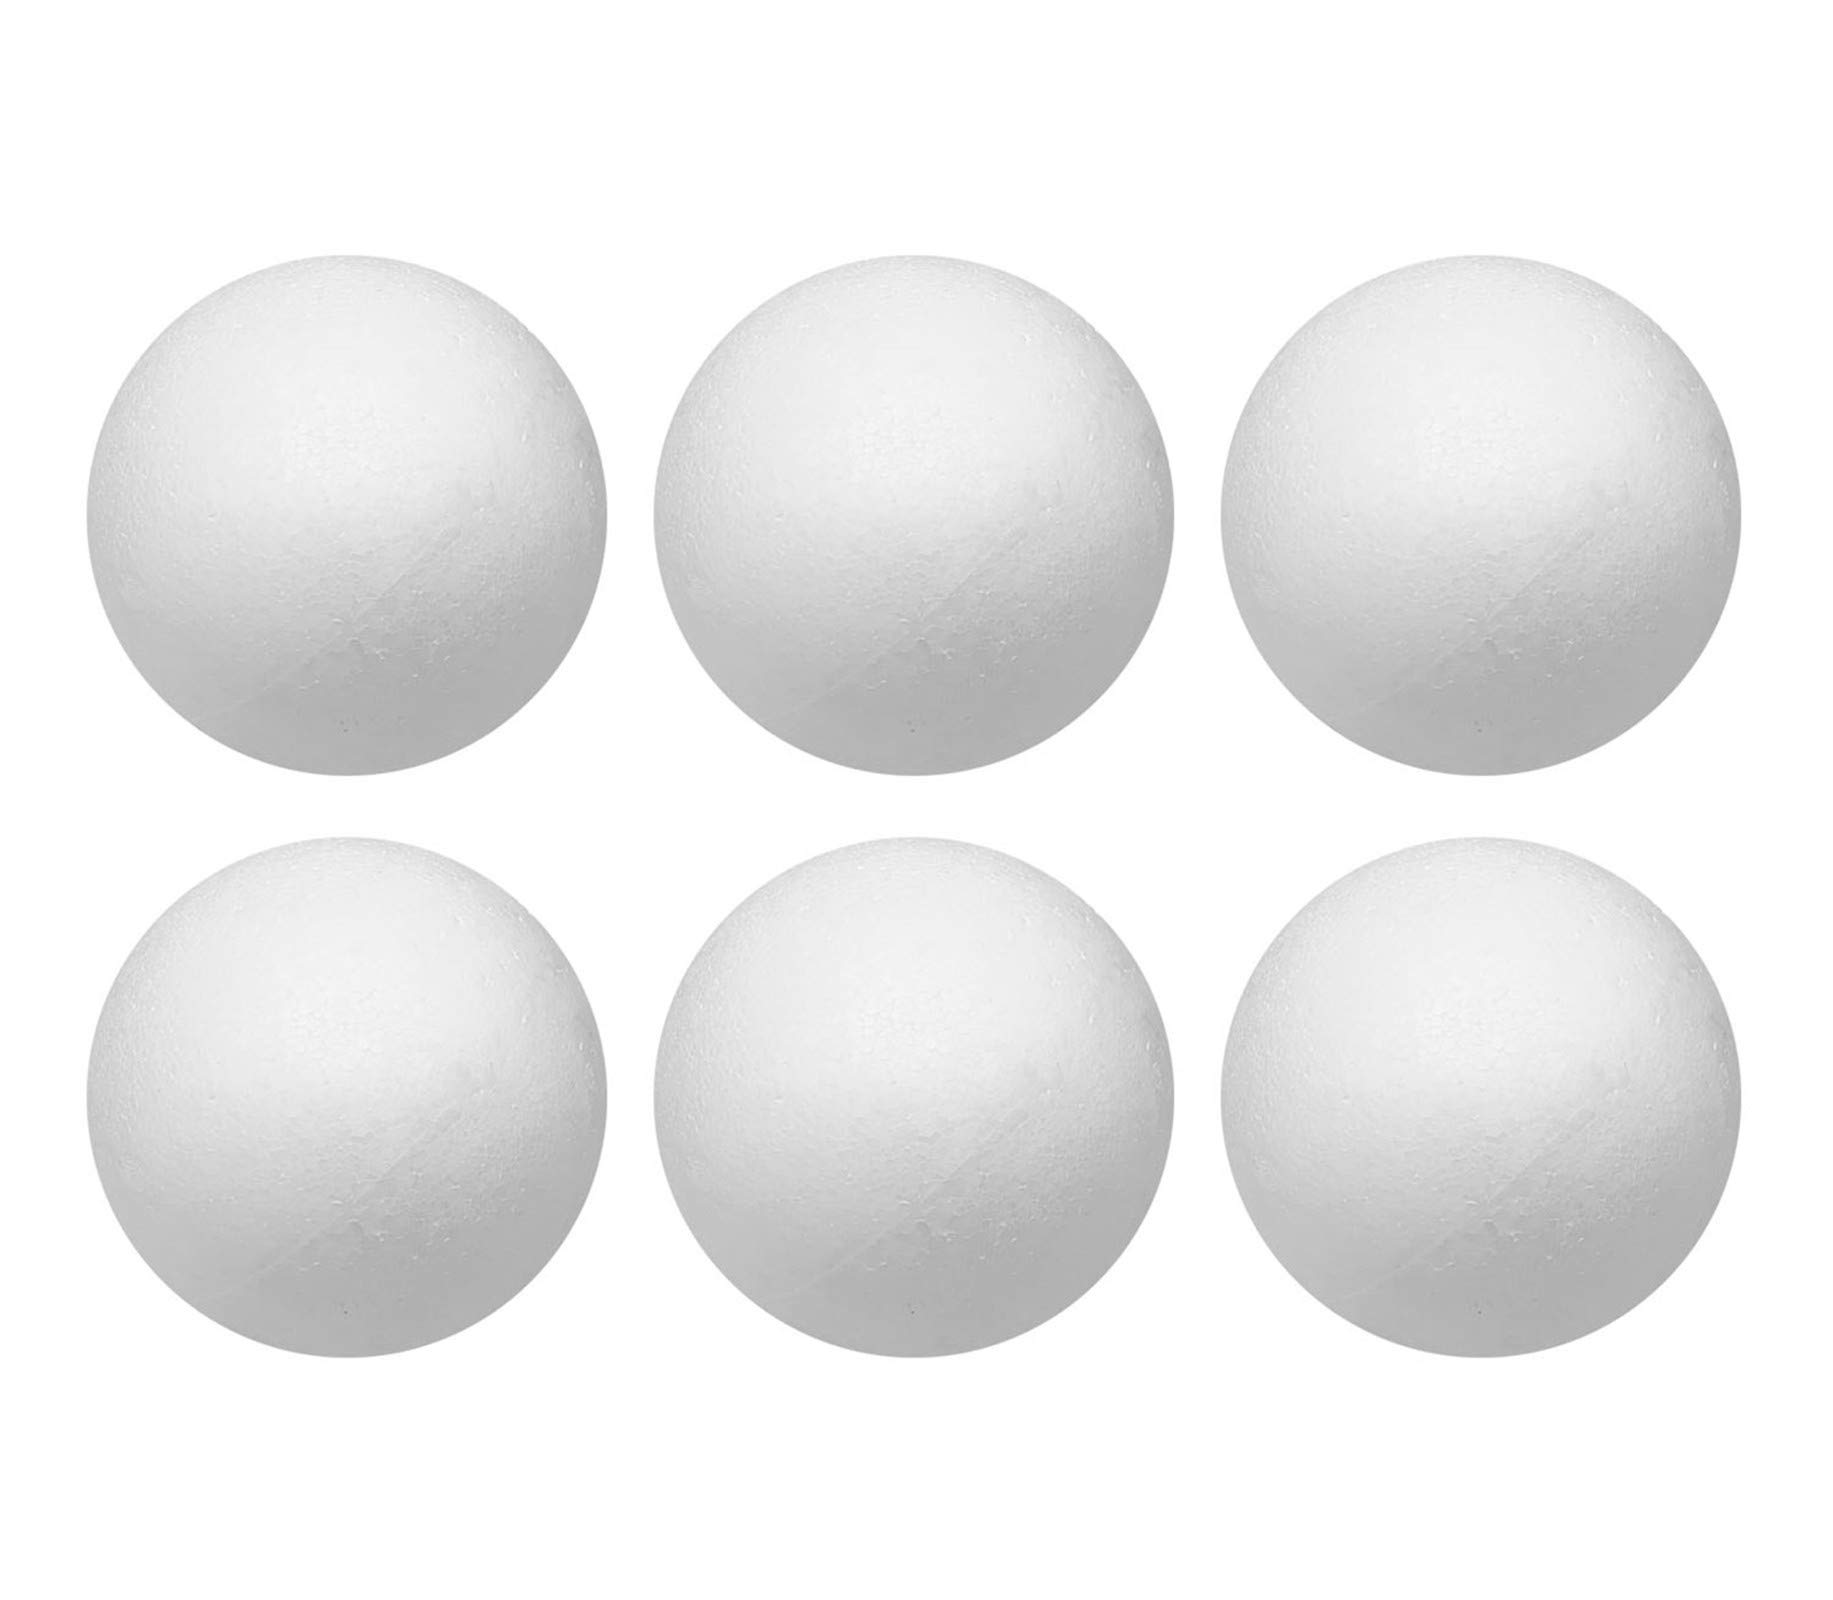 Crafjie Craft Foam Balls 6 Inches Diameter 6-Pack, Smooth Polystyrene Round Foam  Balls, for DIY Arts and Crafts, Ornaments, Ball